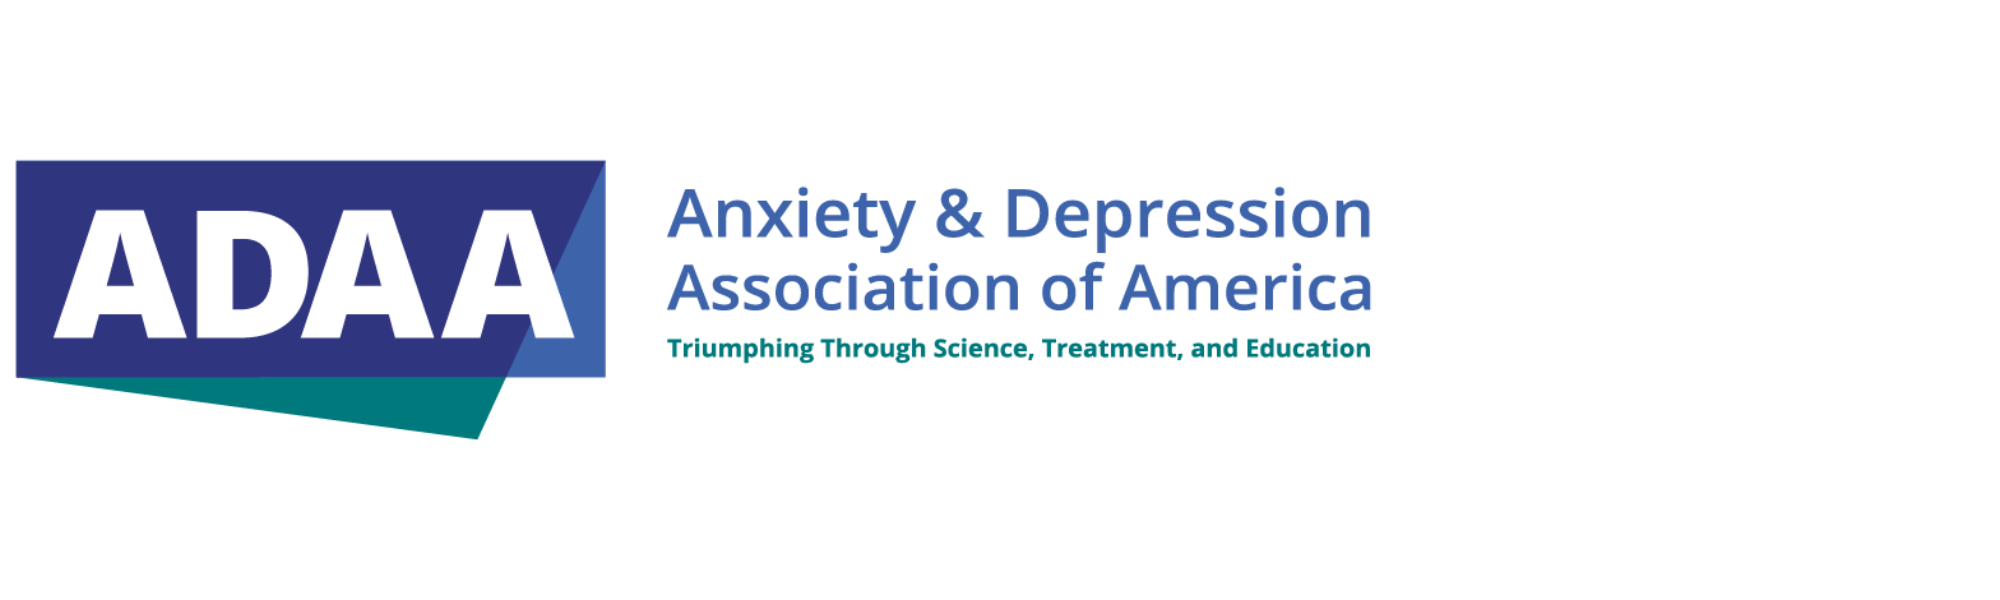 Anxiety and Depression Association of America (ADAA) Logo